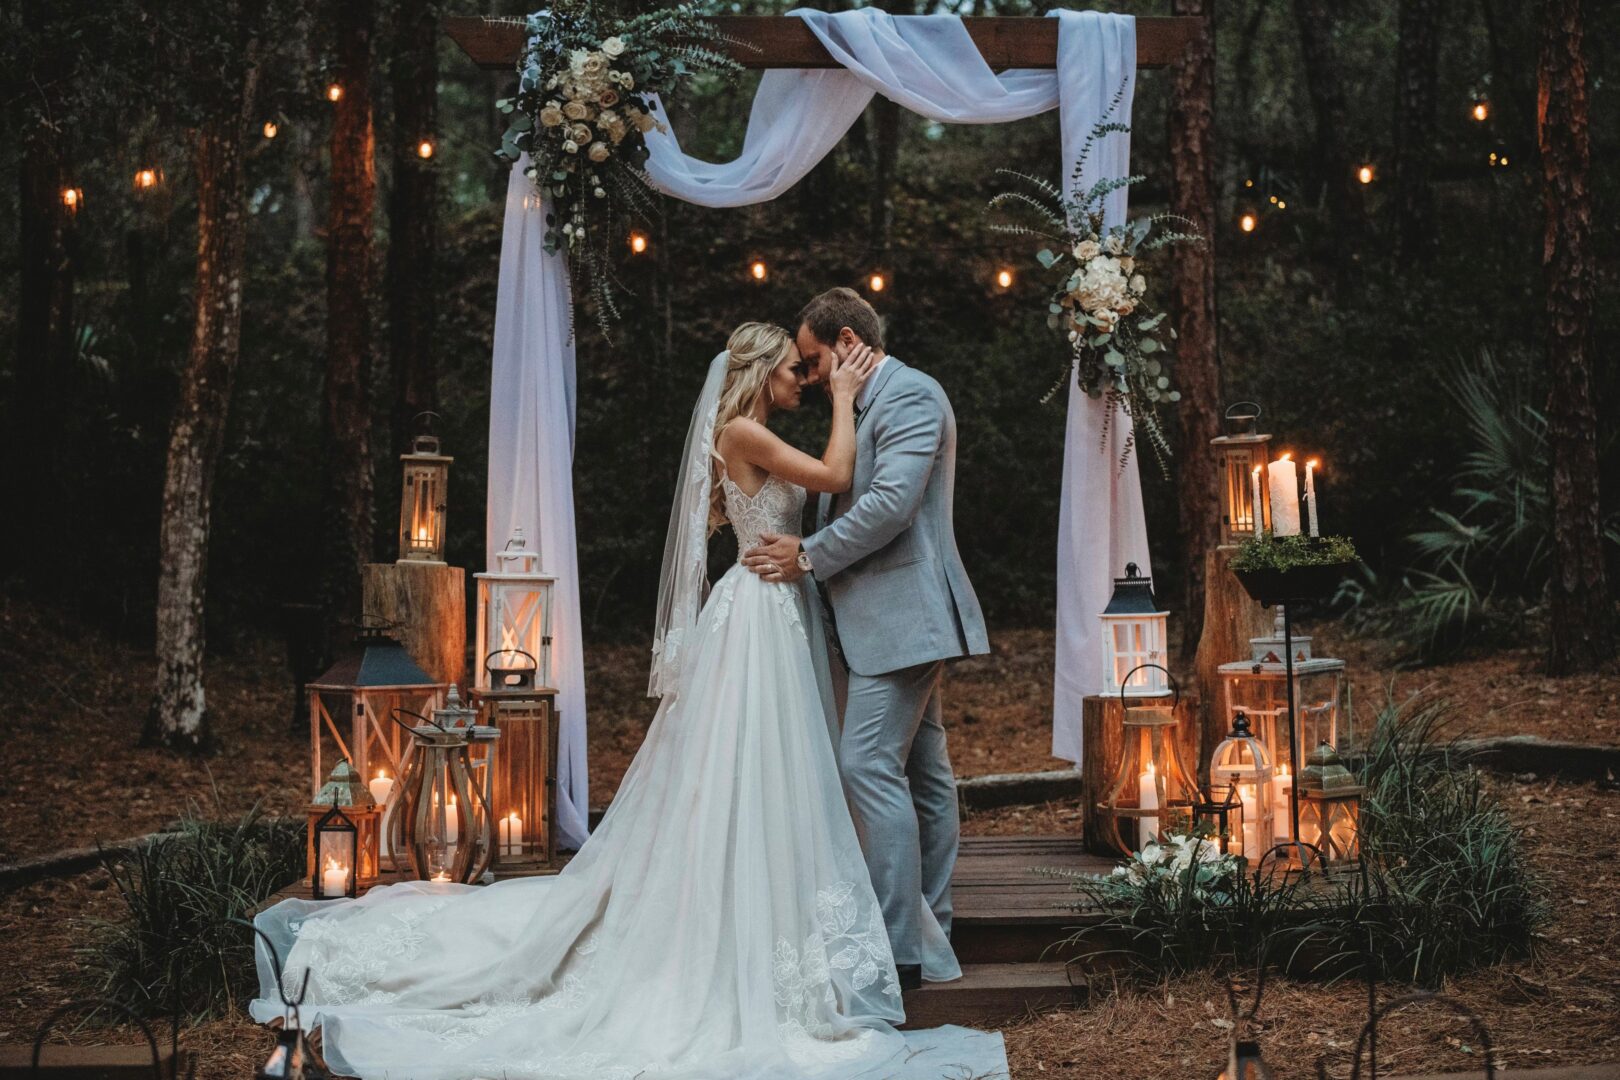 A fairy tale bride and groom share a romantic kiss amidst the enchanting woods during their wedding ceremony. The bride looks exquisite in her princess wedding dress.